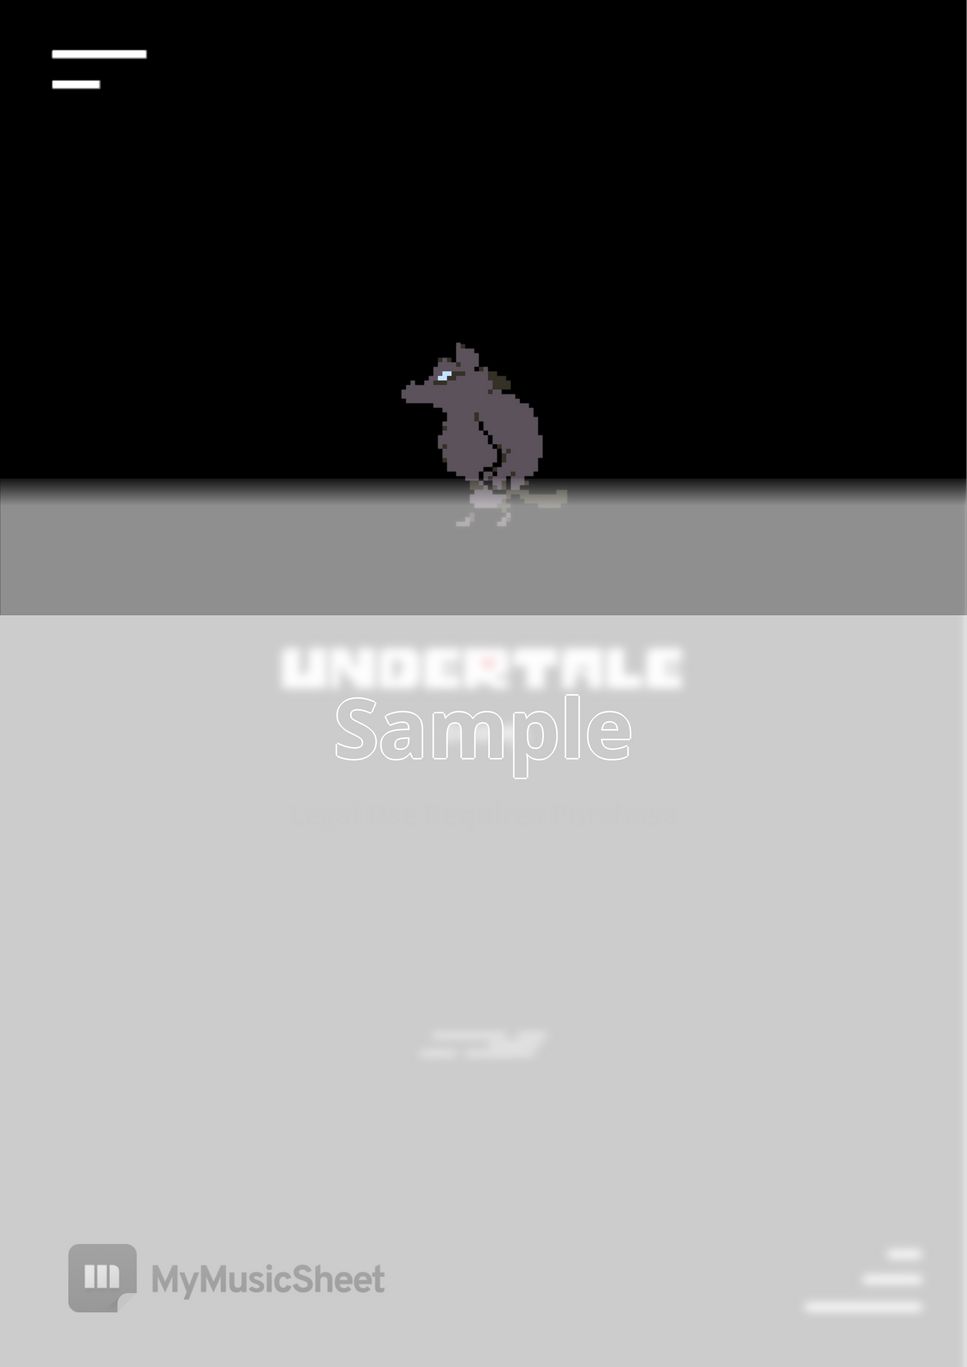 UNDERTALE OST - Snowy (Difficulty ★☆☆☆☆) by PianoBox